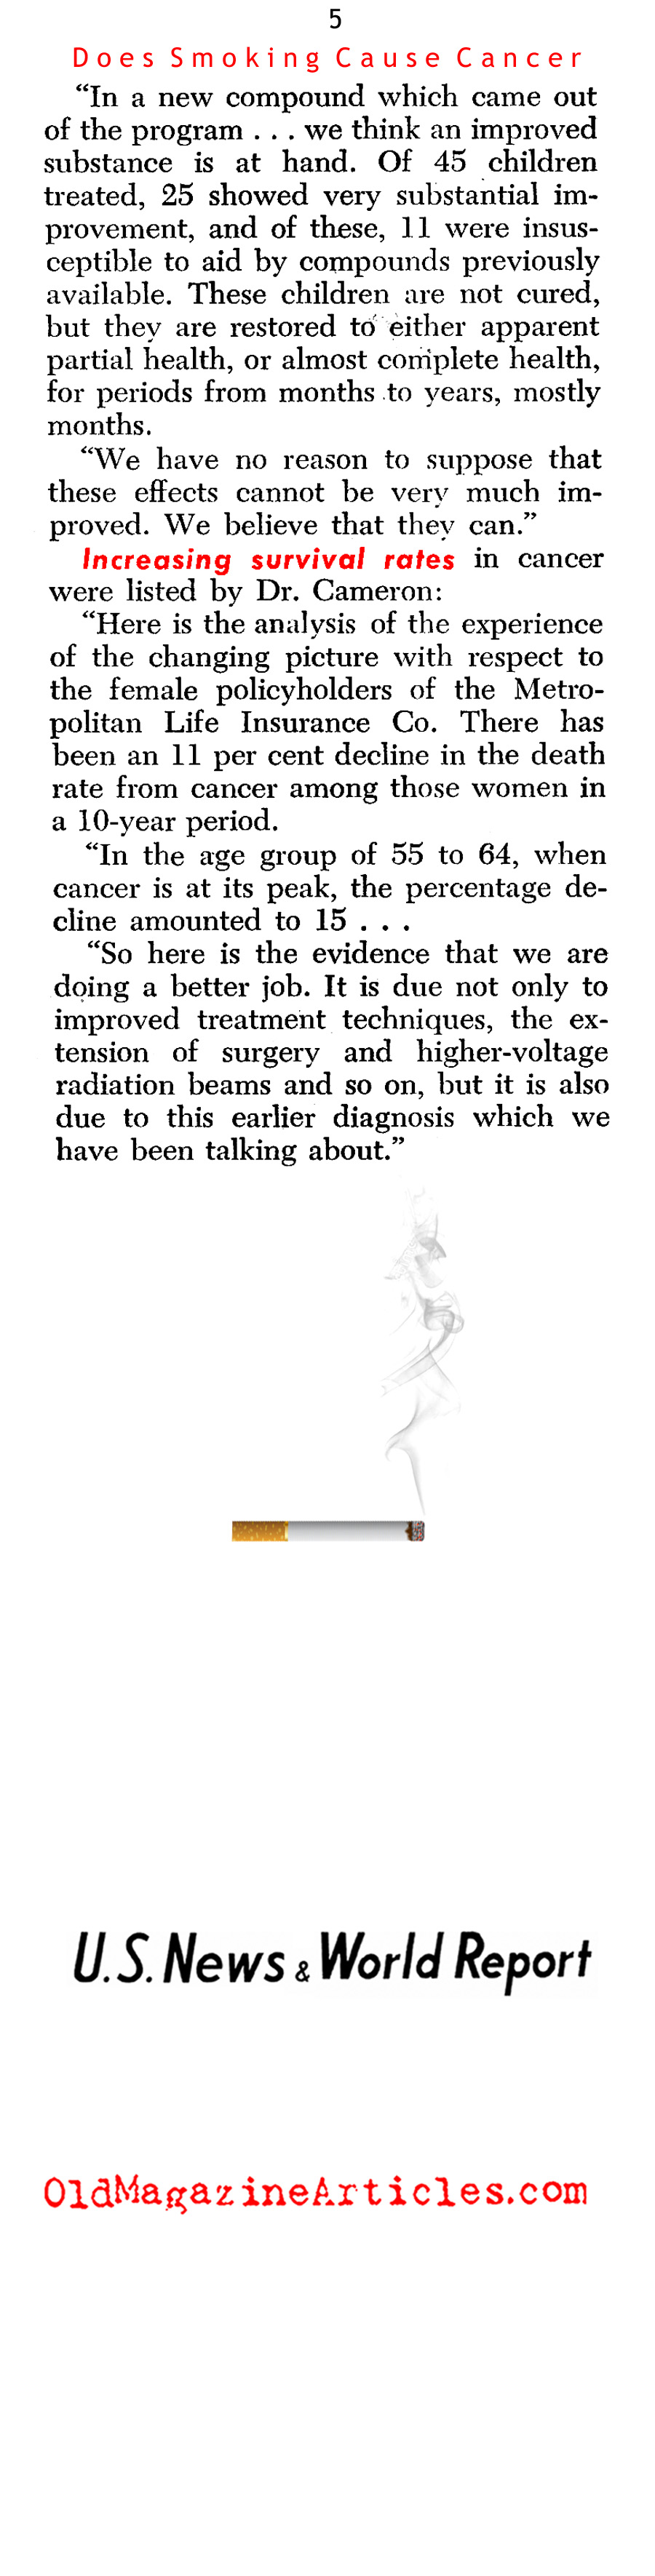 Does Smoking Really Cause Cancer? (United States News, 1953)